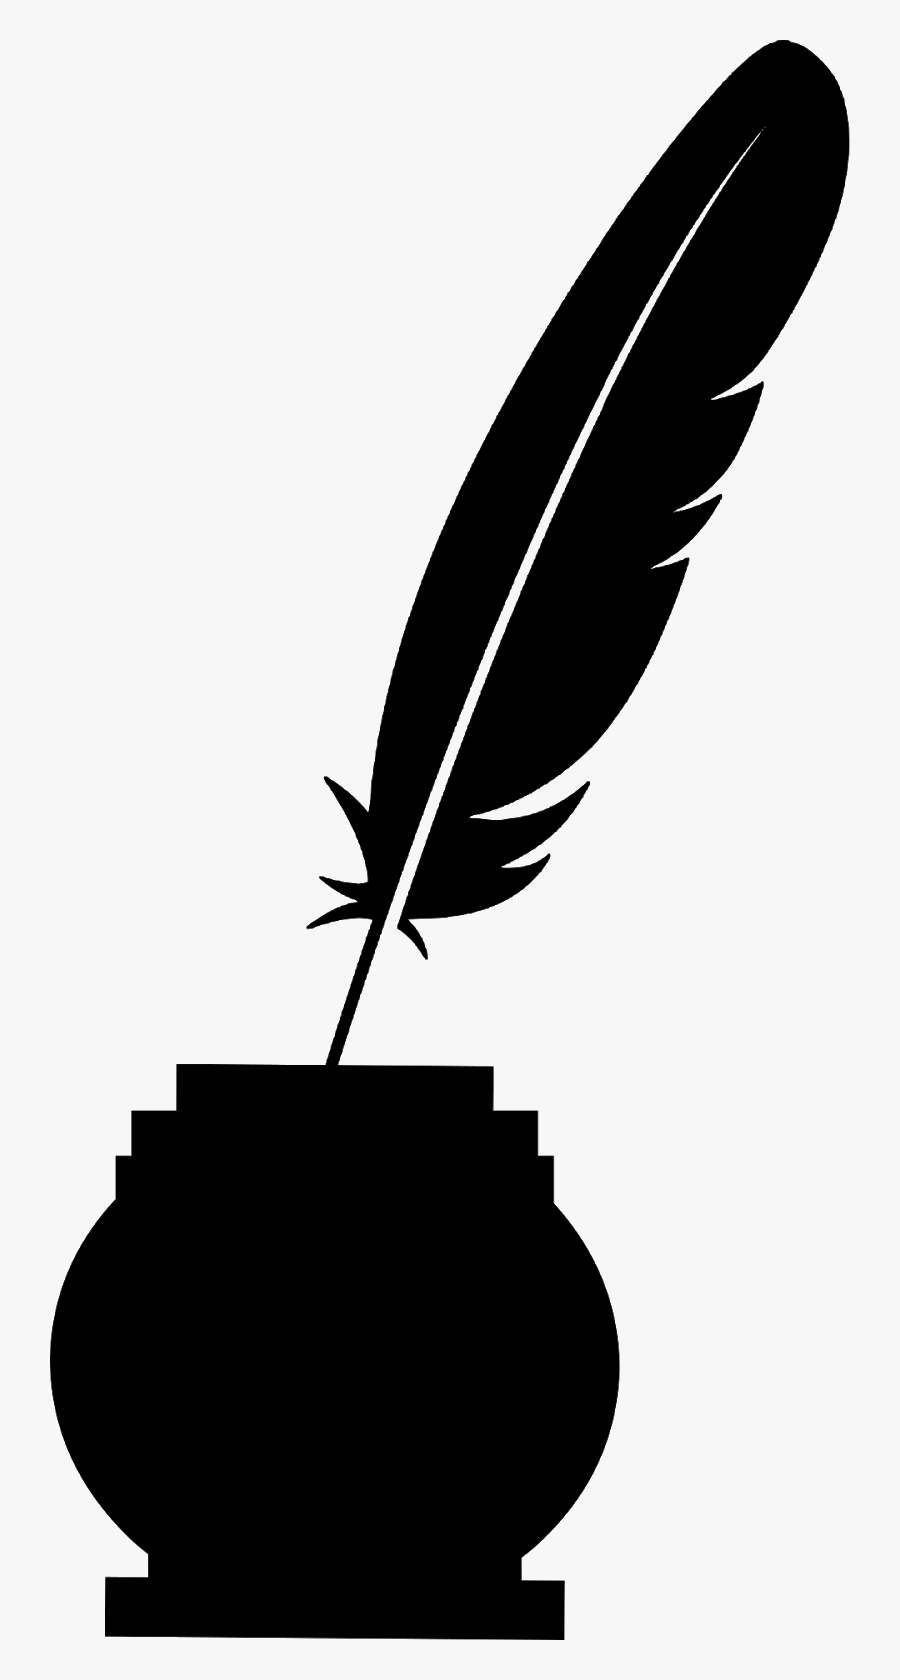 Quill Pen, Write, Silhouette, Author, Ink, Feather, - Transparent Background Feather Clipart, Transparent Clipart